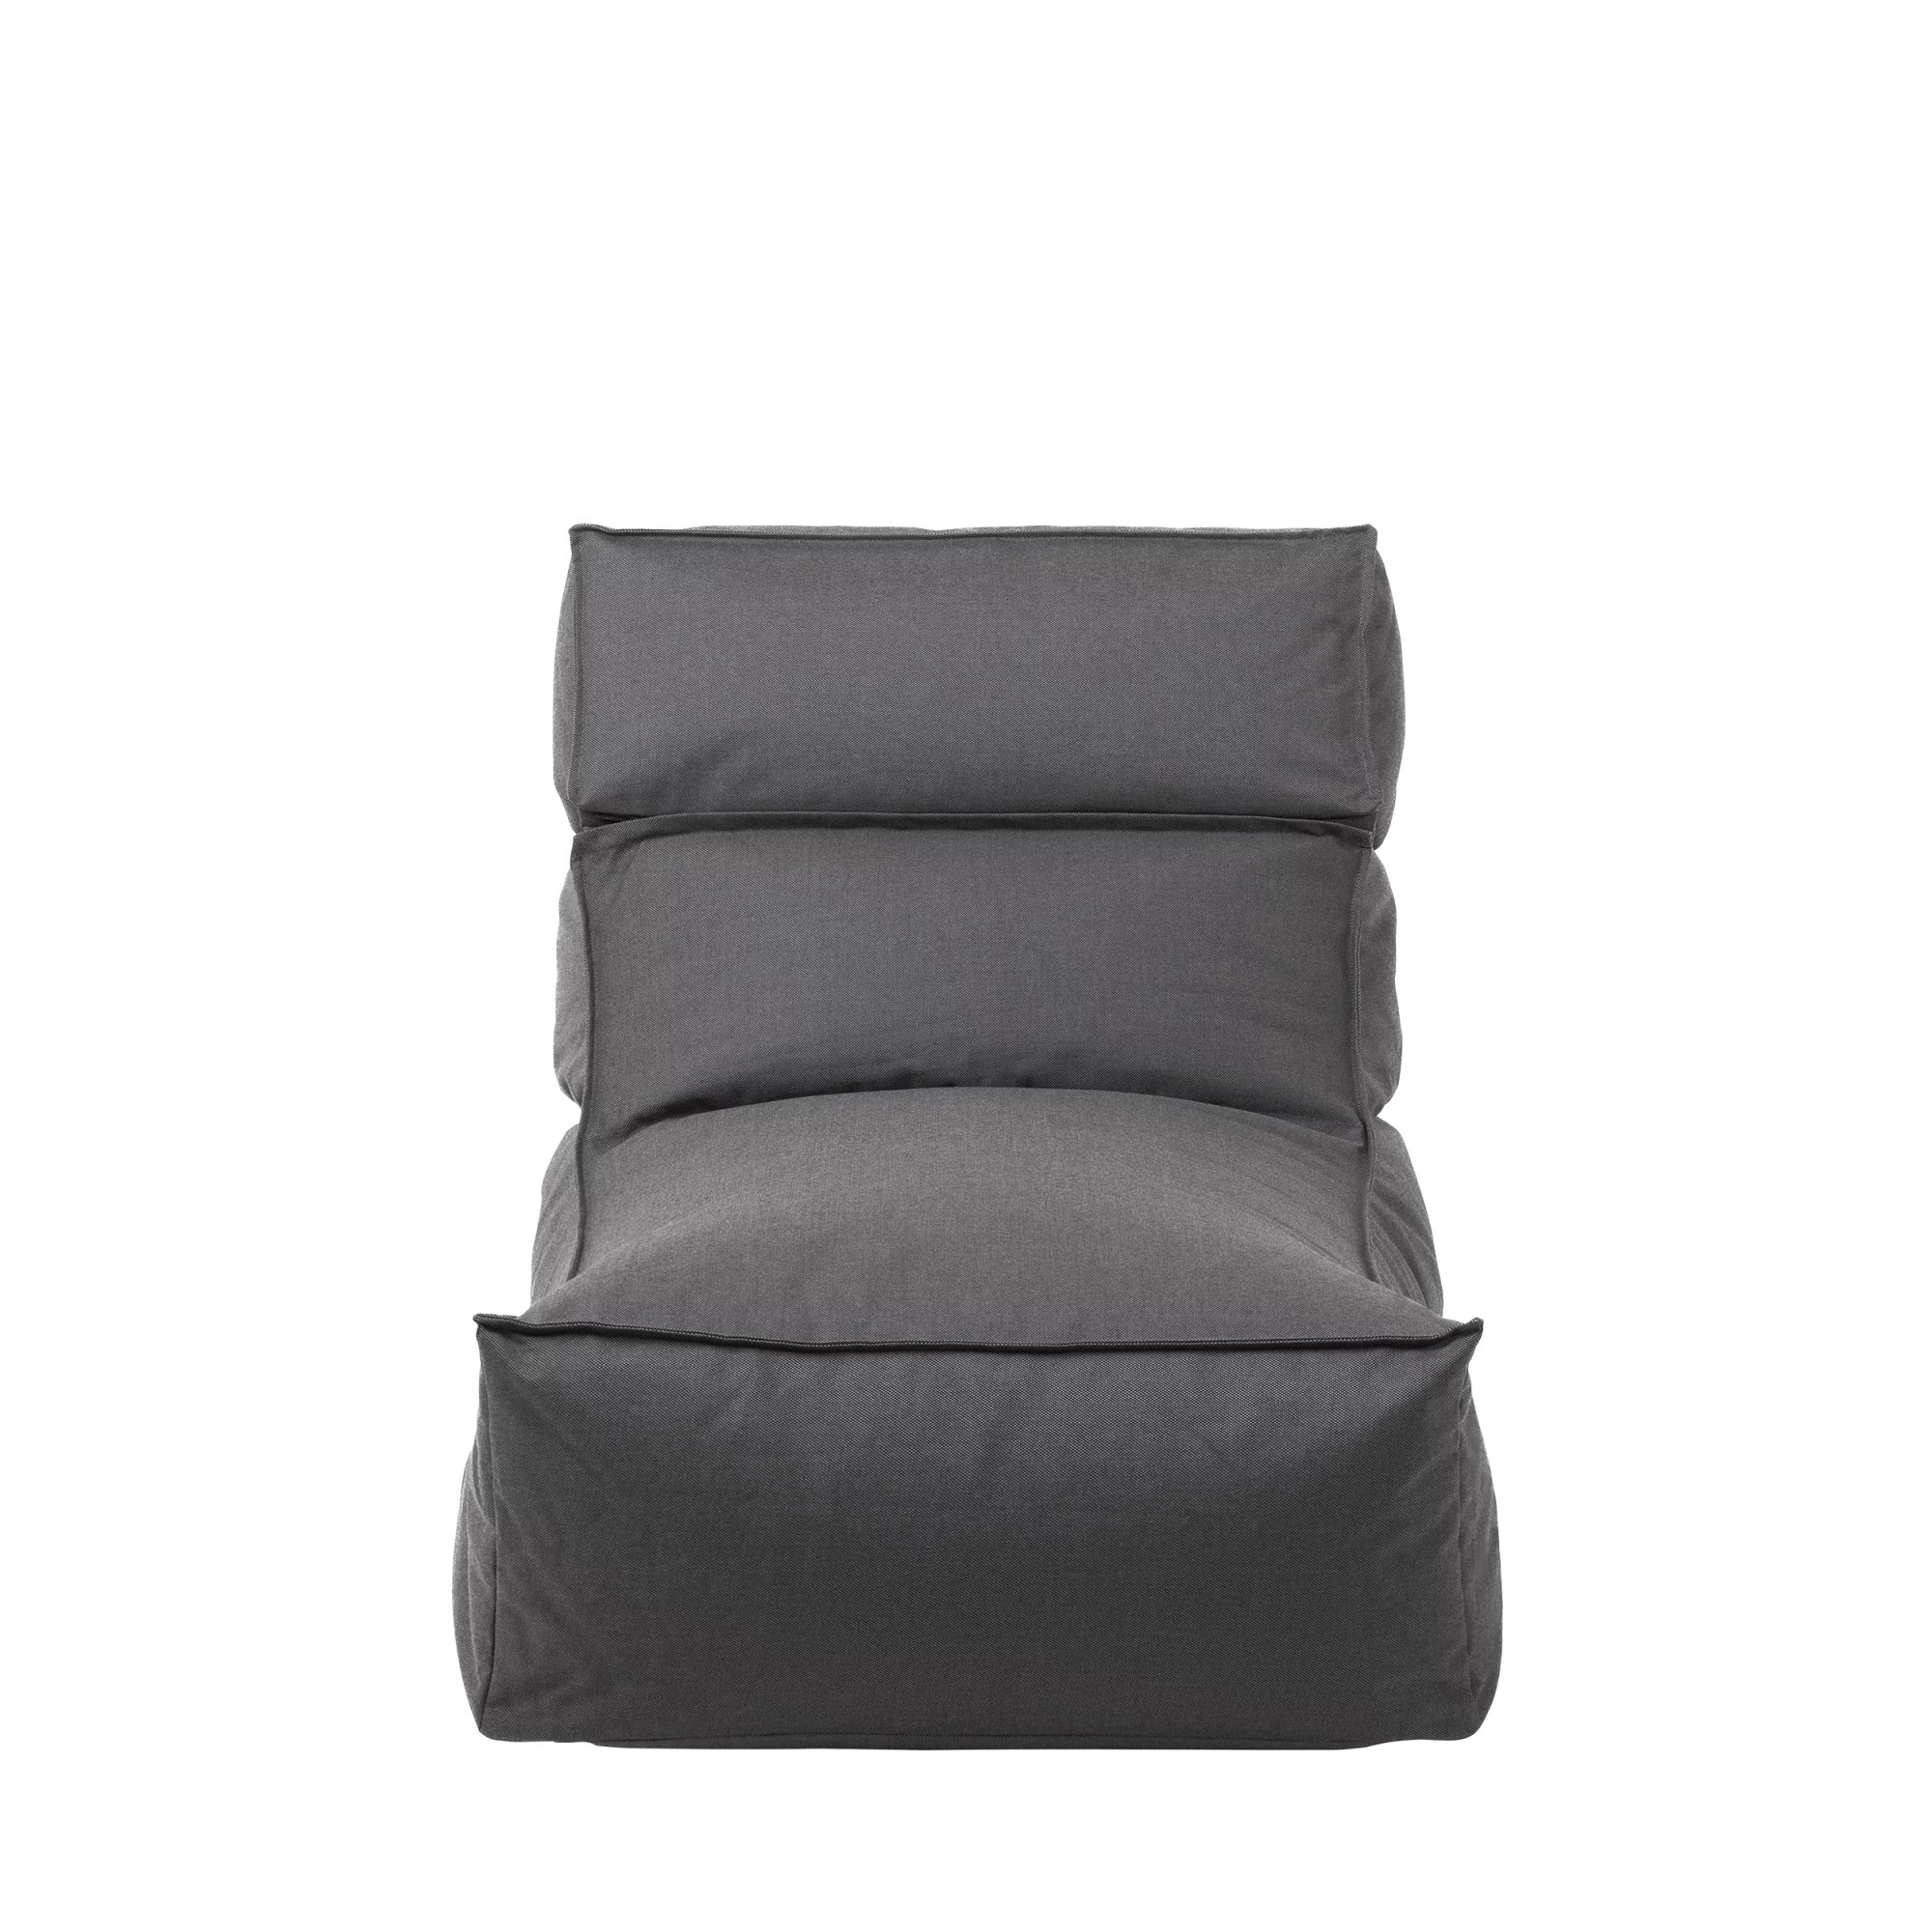 BLOMUS // STAY - OUTDOOR LOUNGER L | COAL